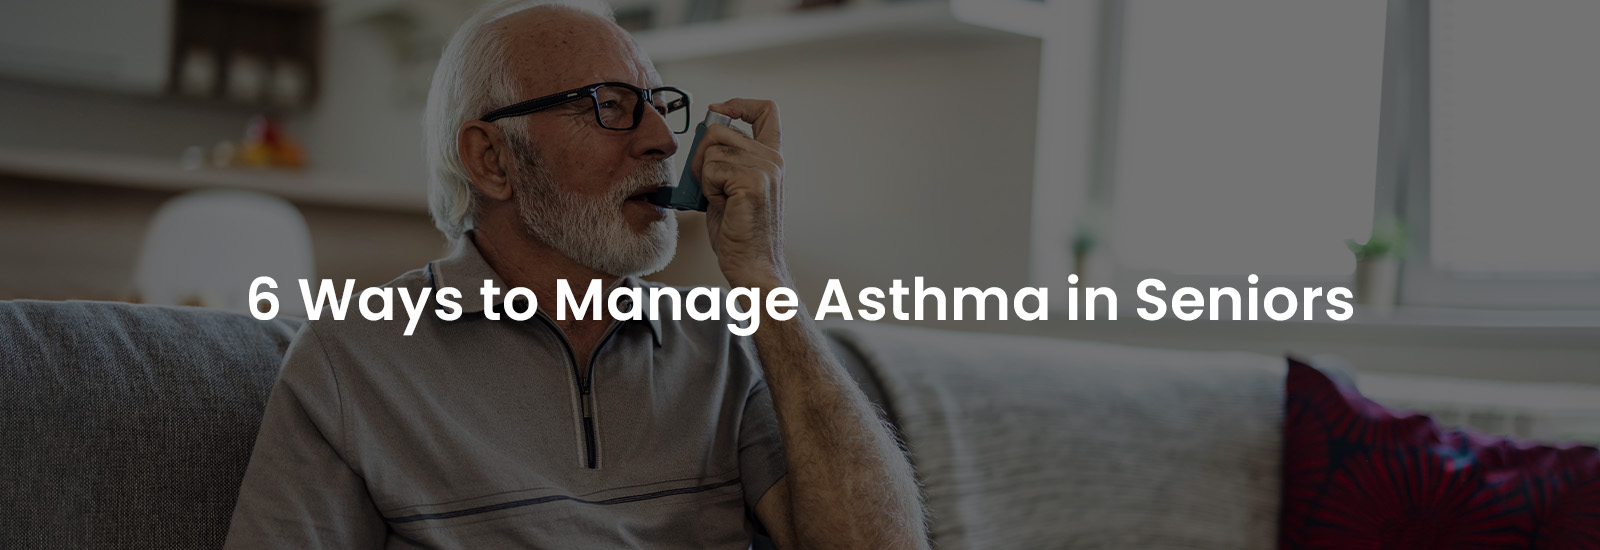 6 Ways to Manage Asthma in Seniors | Banner Image